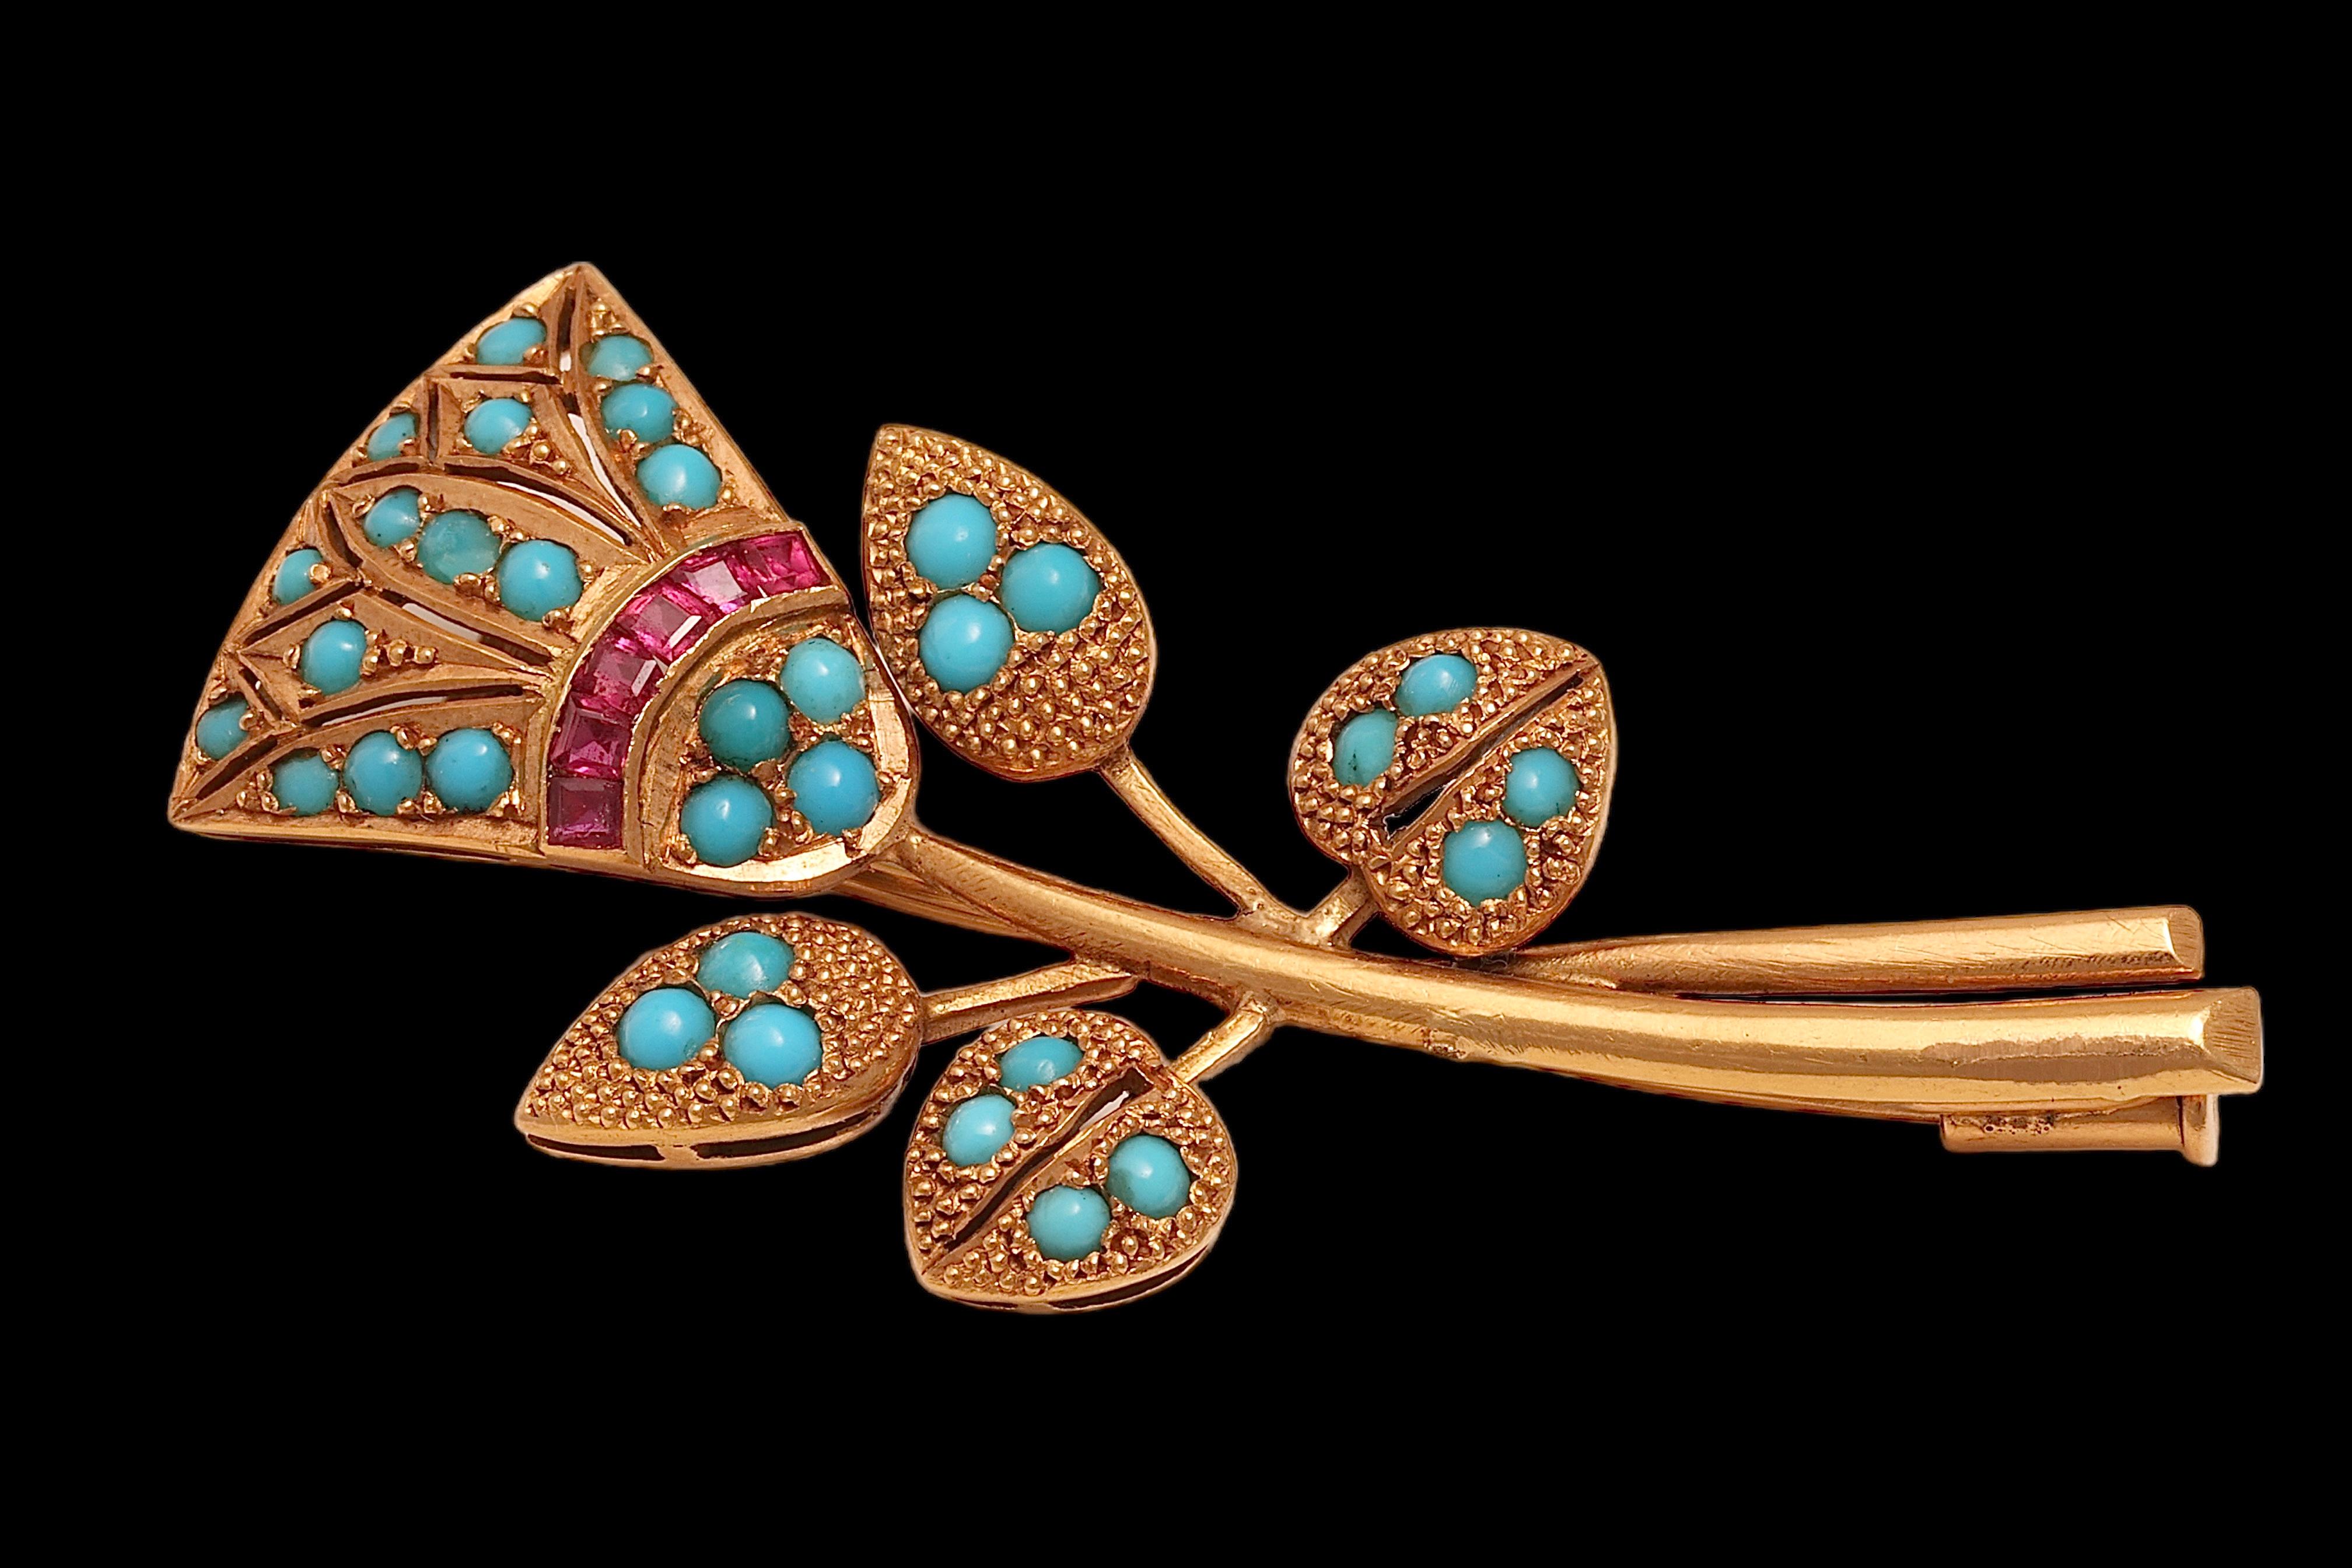 18kt. Yellow Gold Vintage Tulip Brooch which can also be used as a Pendant With Ruby &Turquoise 

Ruby: 6 calibrated square natural rubies

Turquoise: 33 turquoise stones

Material: 18 kt. Yellow gold

Measurements: 54.4 mm x 23.1 mm x 8.9 mm

Total